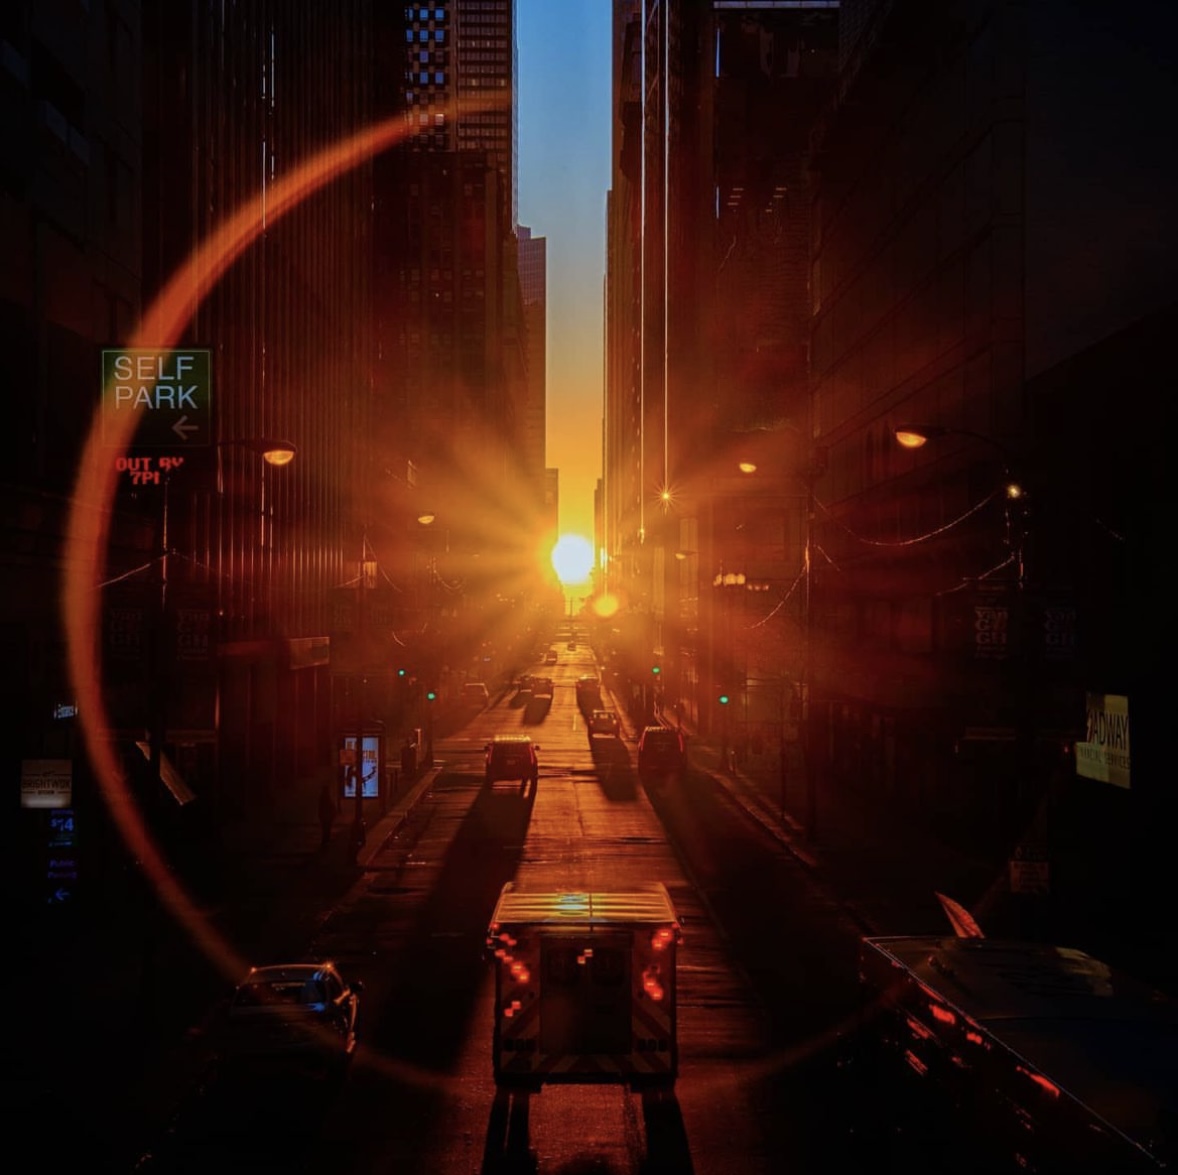 The Sun setting perfectly in between skyscrapers down an east-west facing street in Chicago, Illinois. Due to the grid orientation in the City of Chicago, during an equinox the Sun sets perfectly down the middle of the city’s streets—a phenomenon known as Chicagohenge. Image credit: Raf Winterpacht (@rafwinterpacht on Instagram)